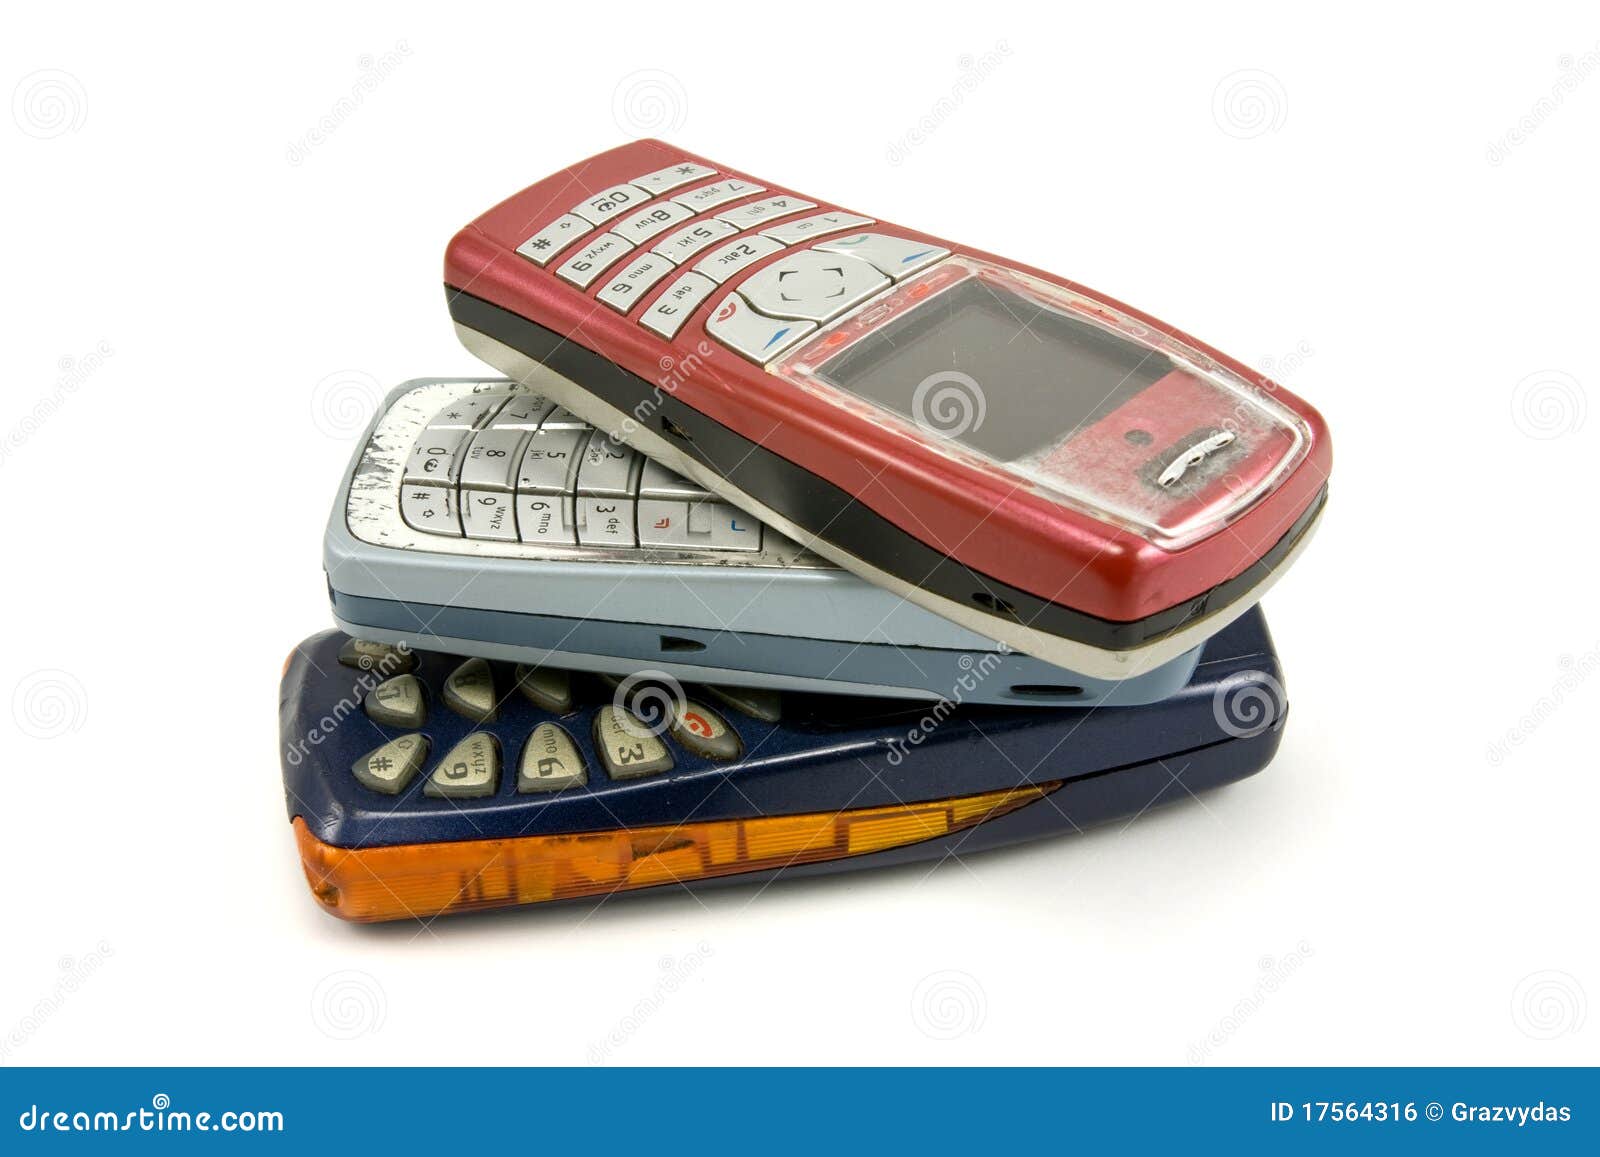 old cell phones